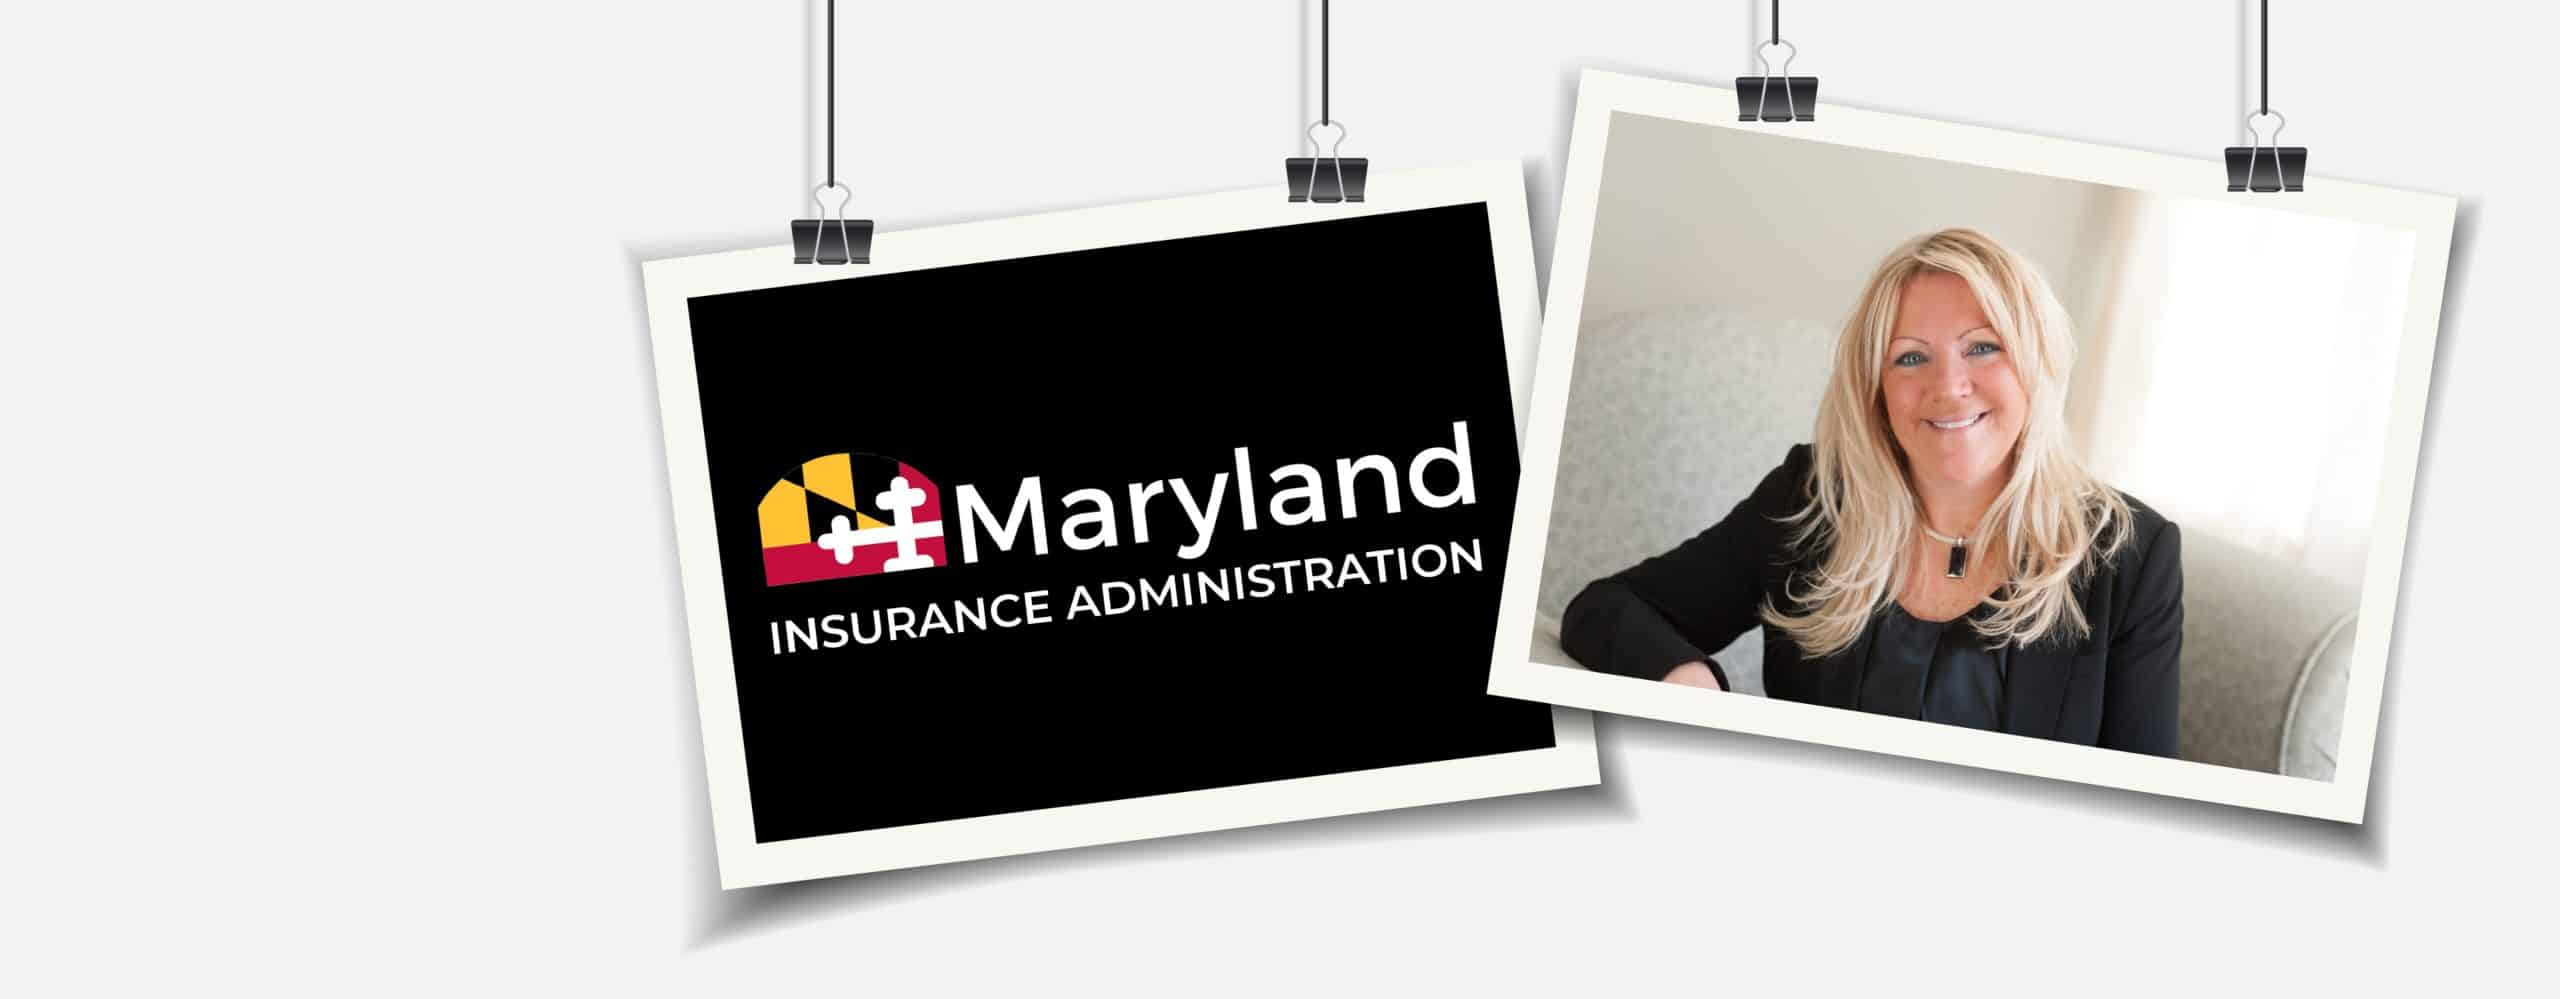 Maryland Insurance Administration image on PSA Financial's website